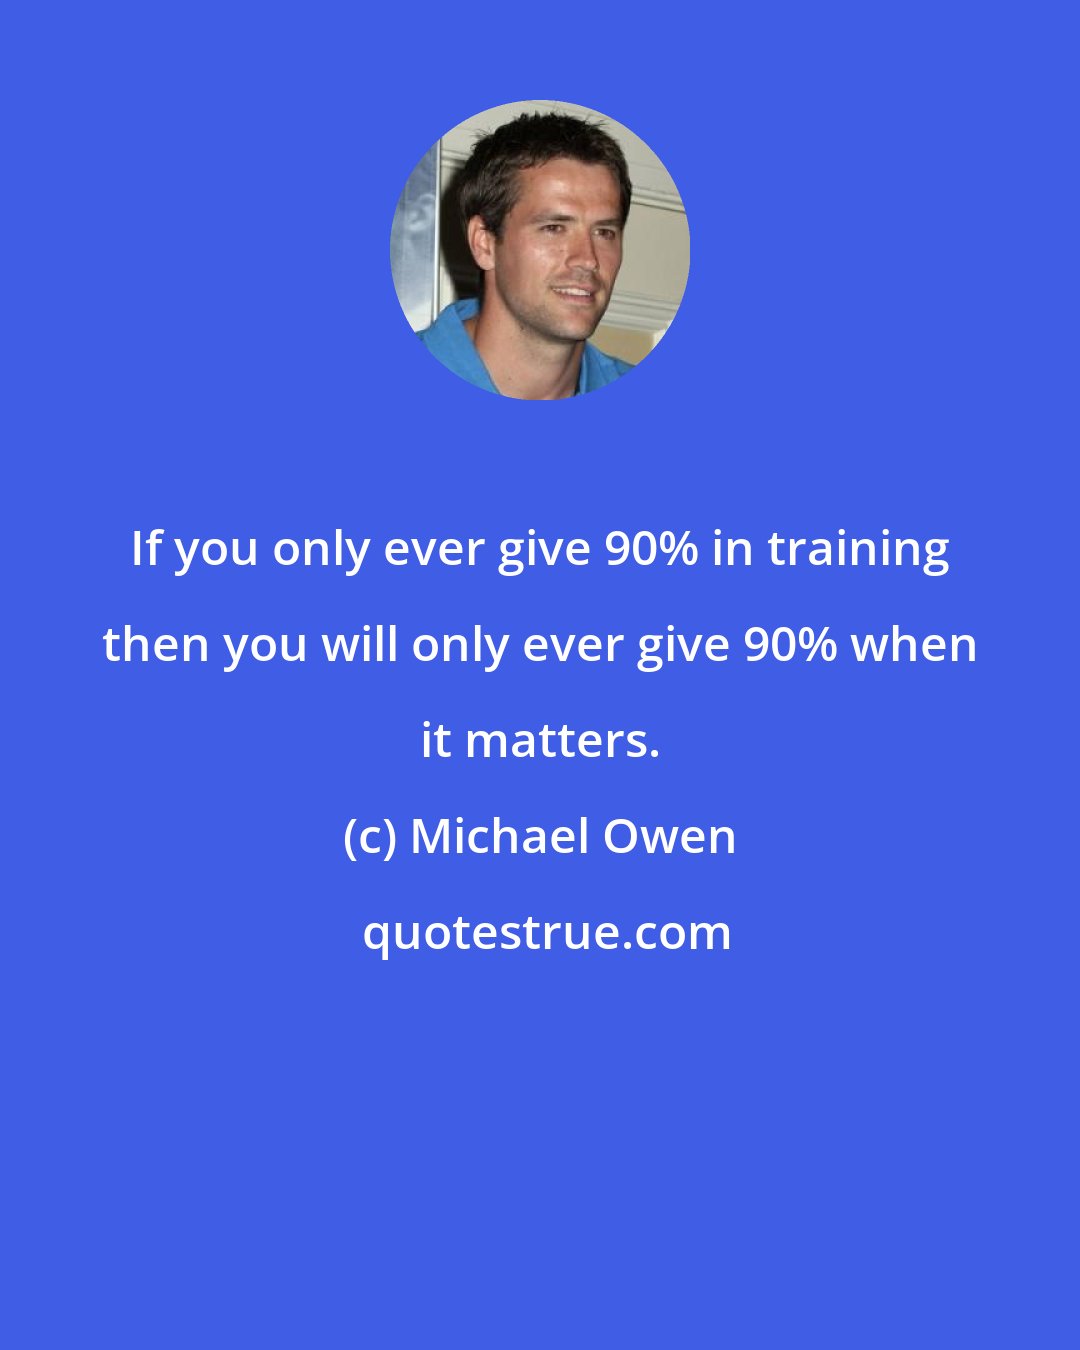 Michael Owen: If you only ever give 90% in training then you will only ever give 90% when it matters.